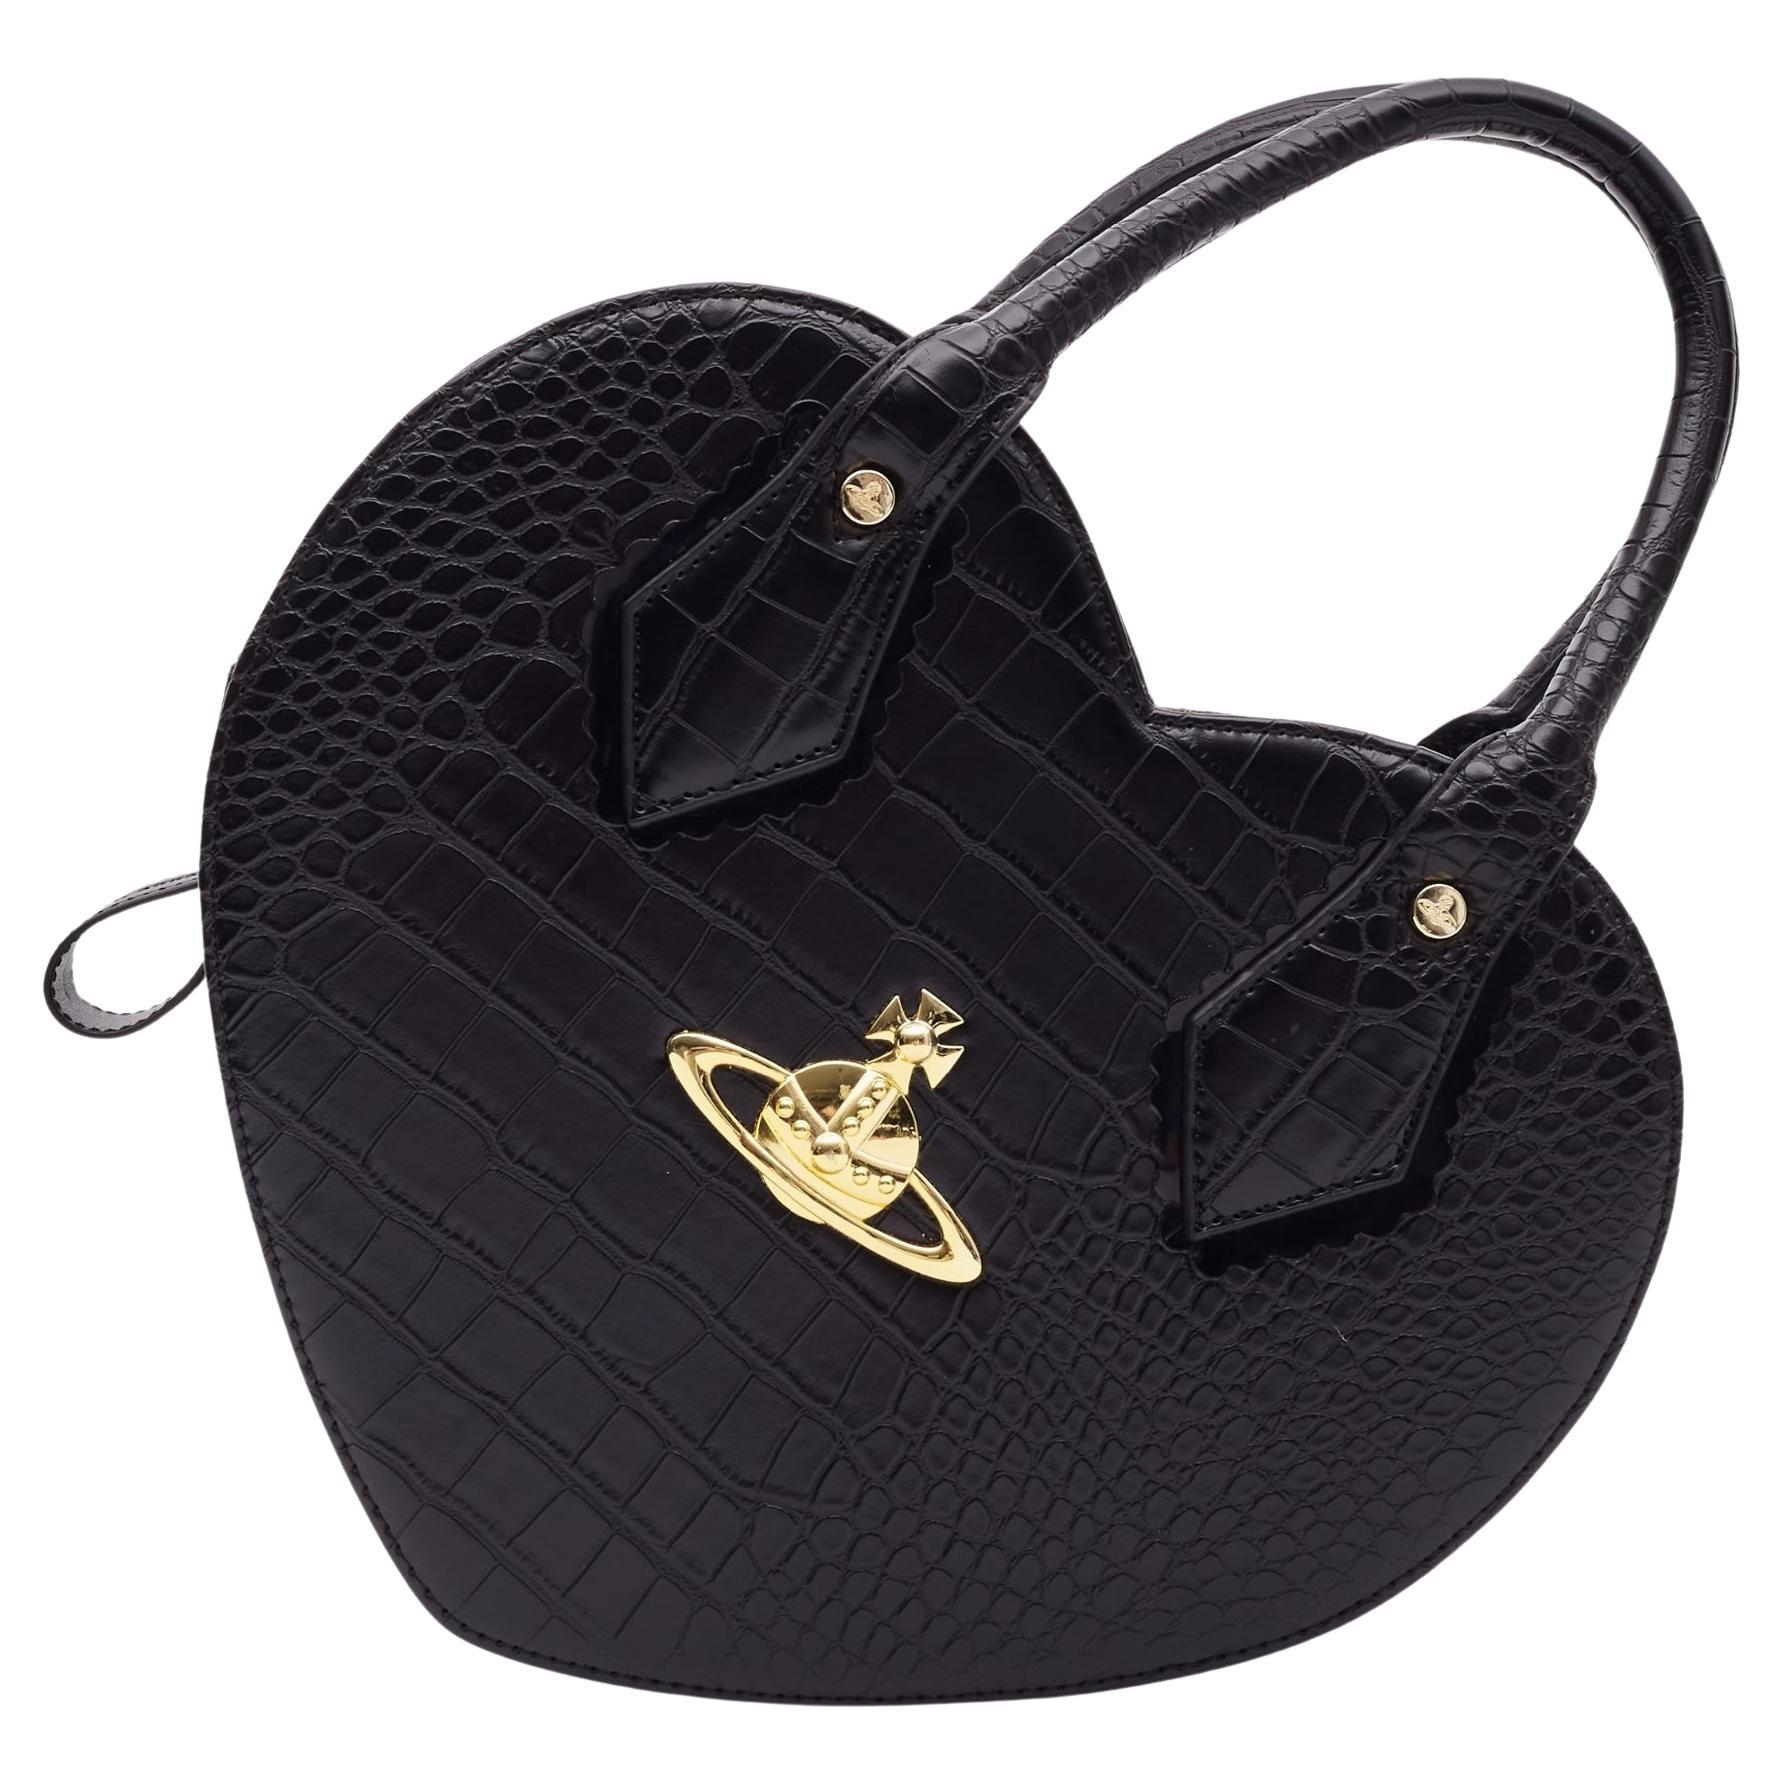 Where are Vivienne Westwood bags made?